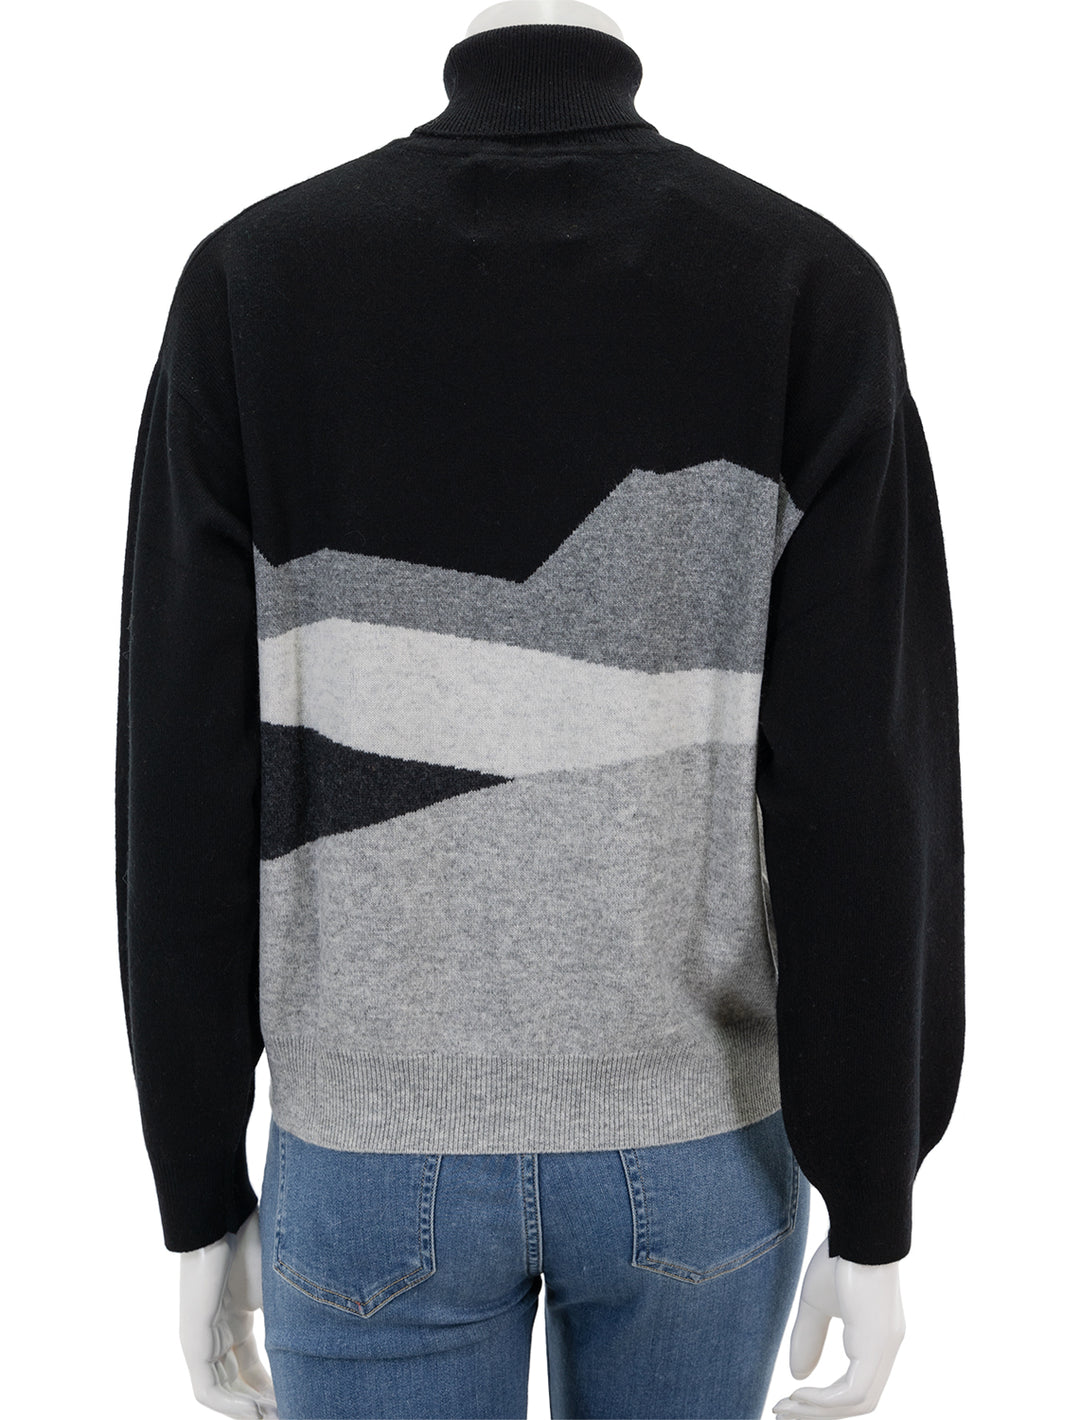 Back view of Jumper 1234's mountaineer roll collar sweater in black.